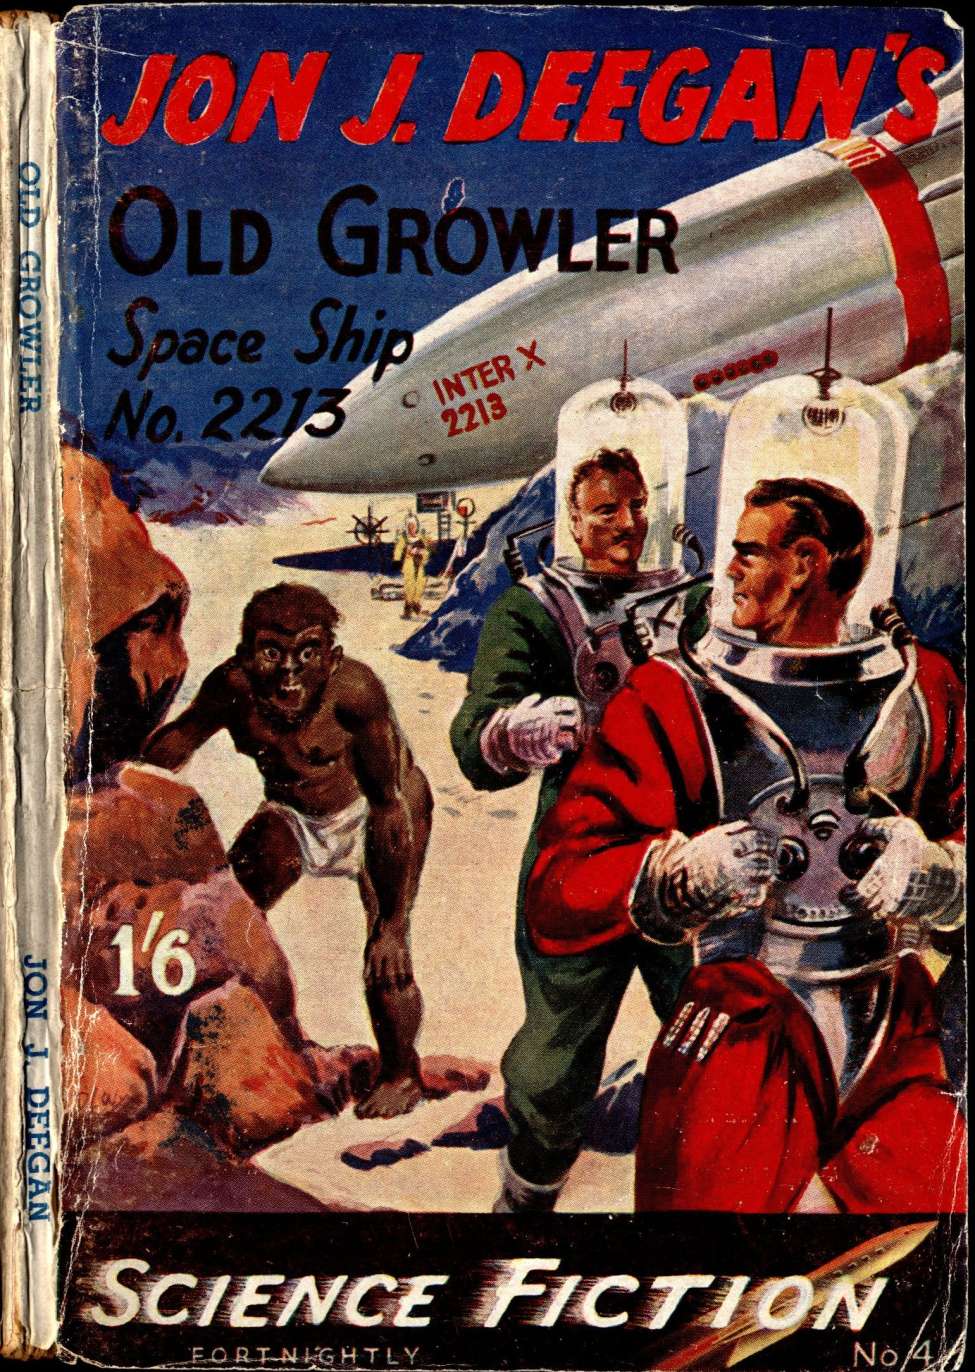 Book Cover For Authentic Science Fiction 4 - Old Growler - Space Ship No. 2213 - Jon J. Deegan